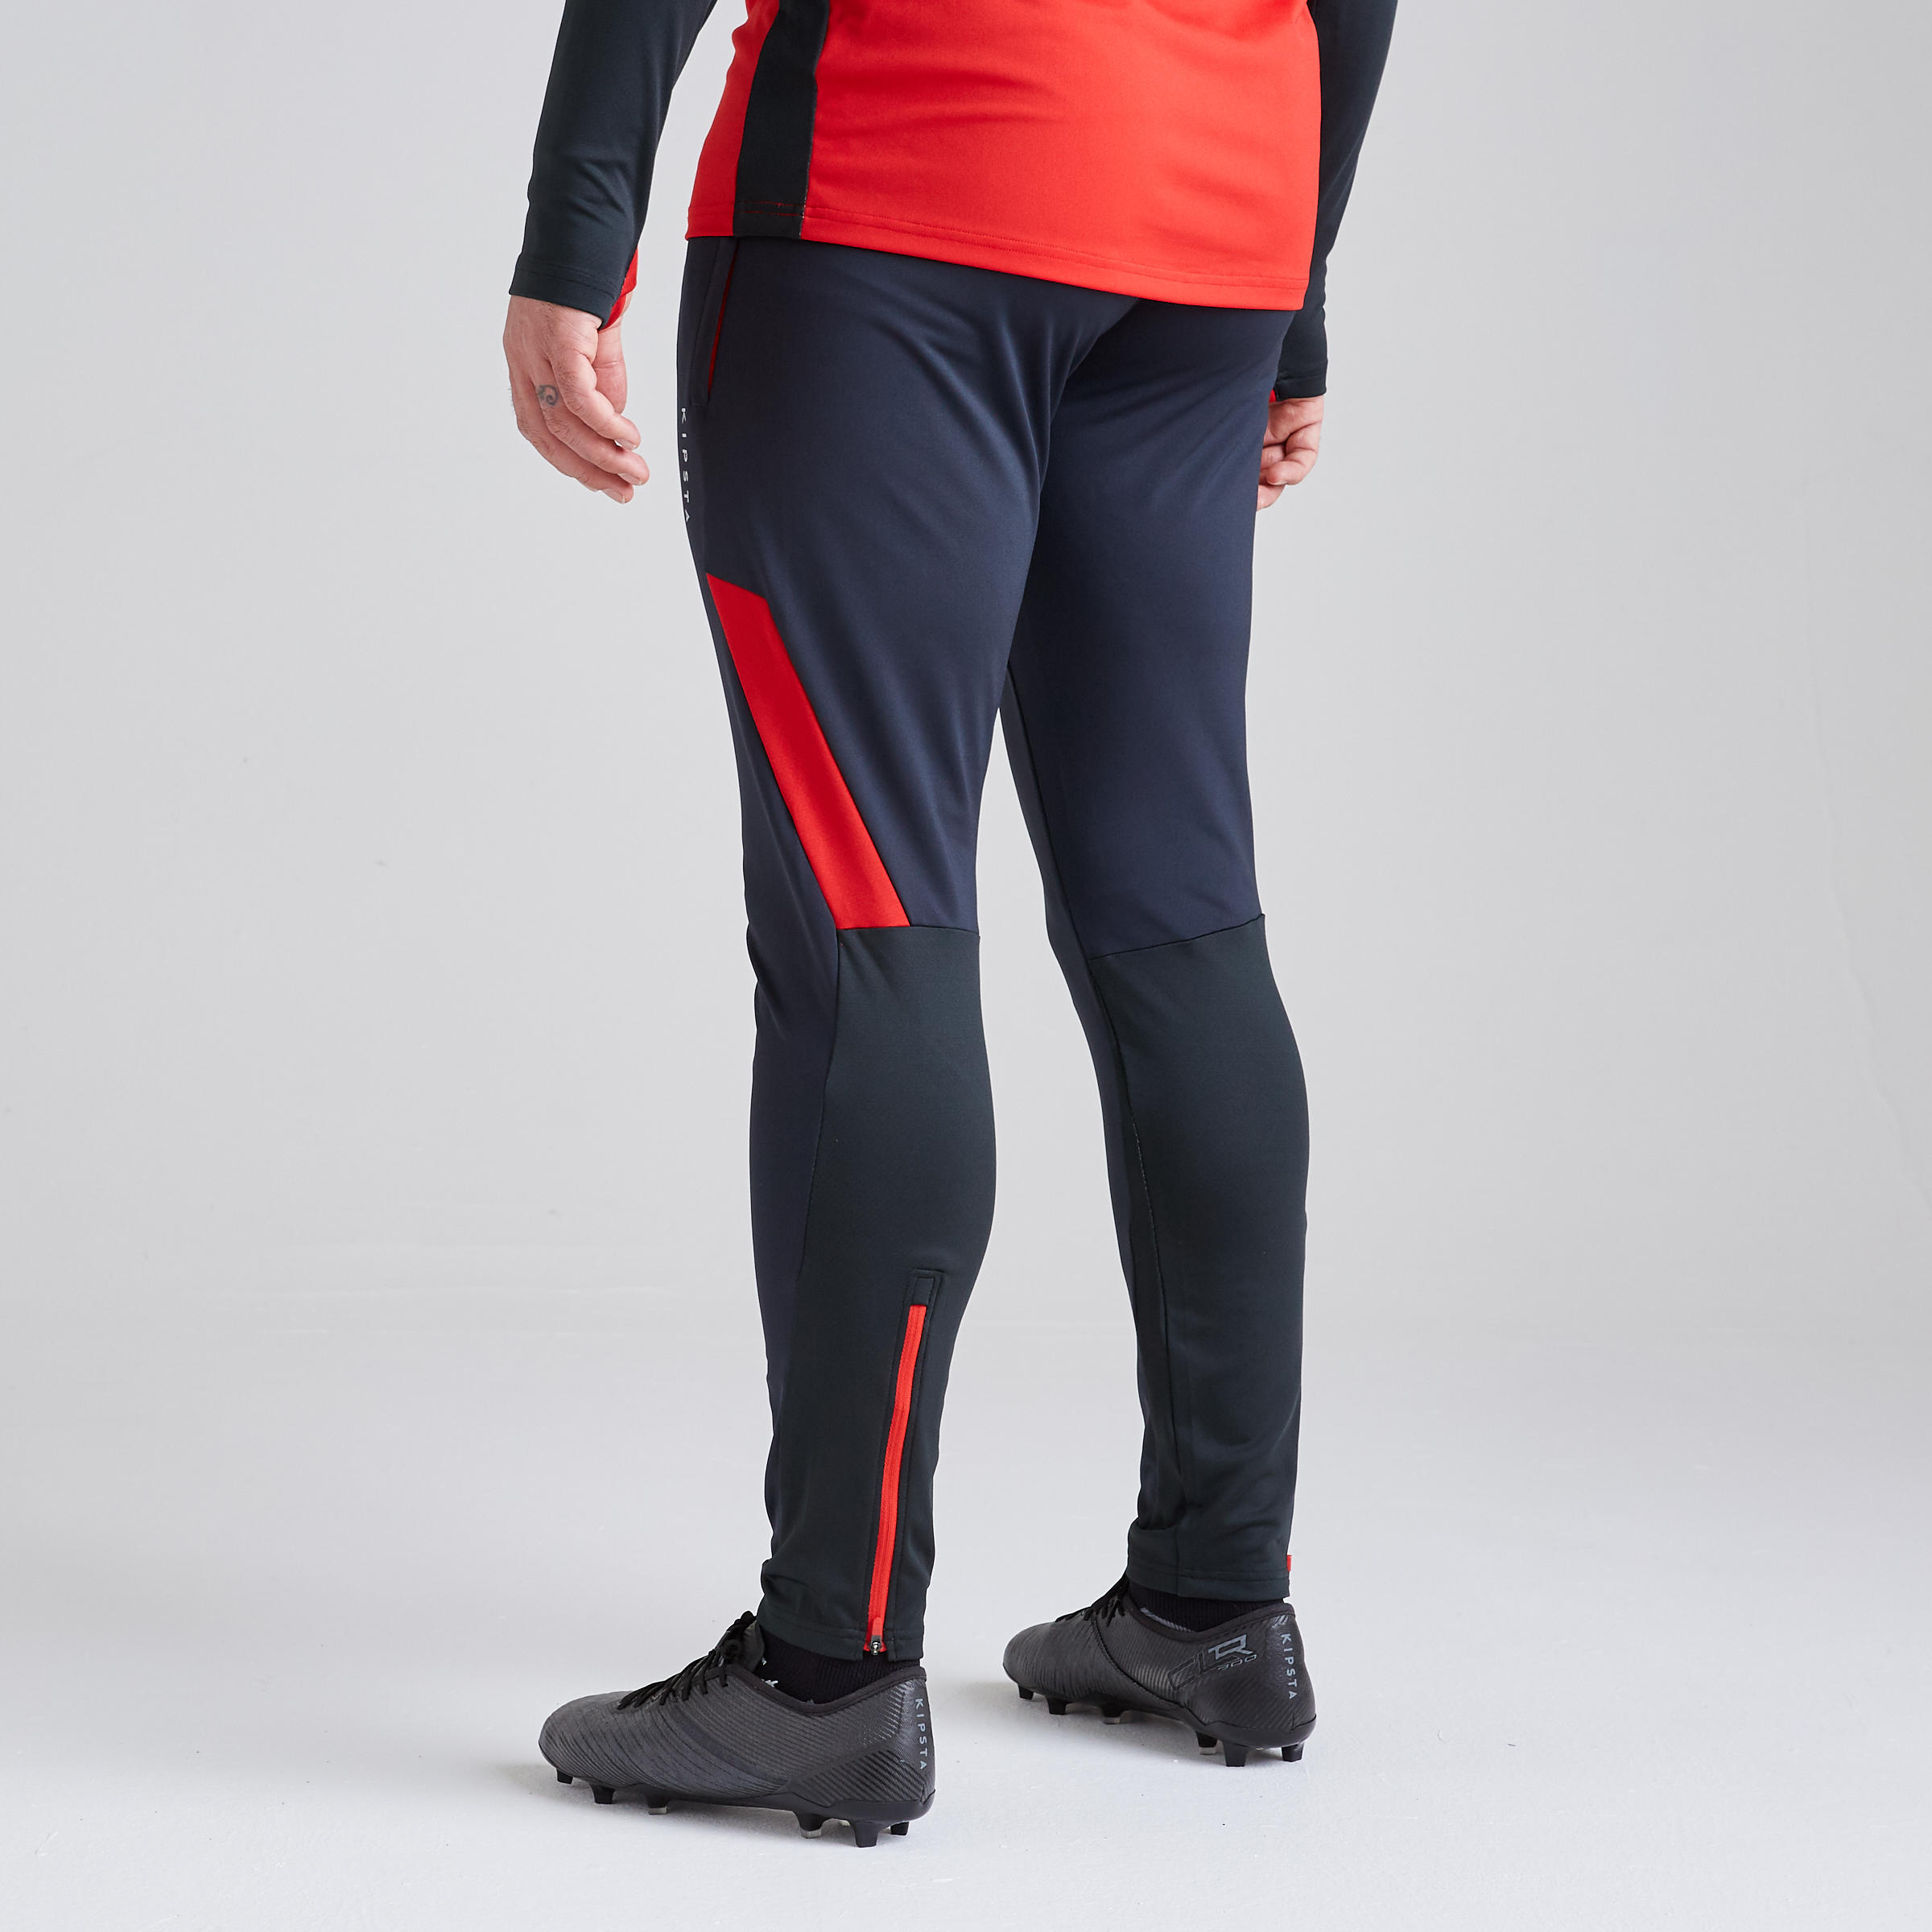 Adult Football Bottoms T500 - Carbon Grey/Red 6/7